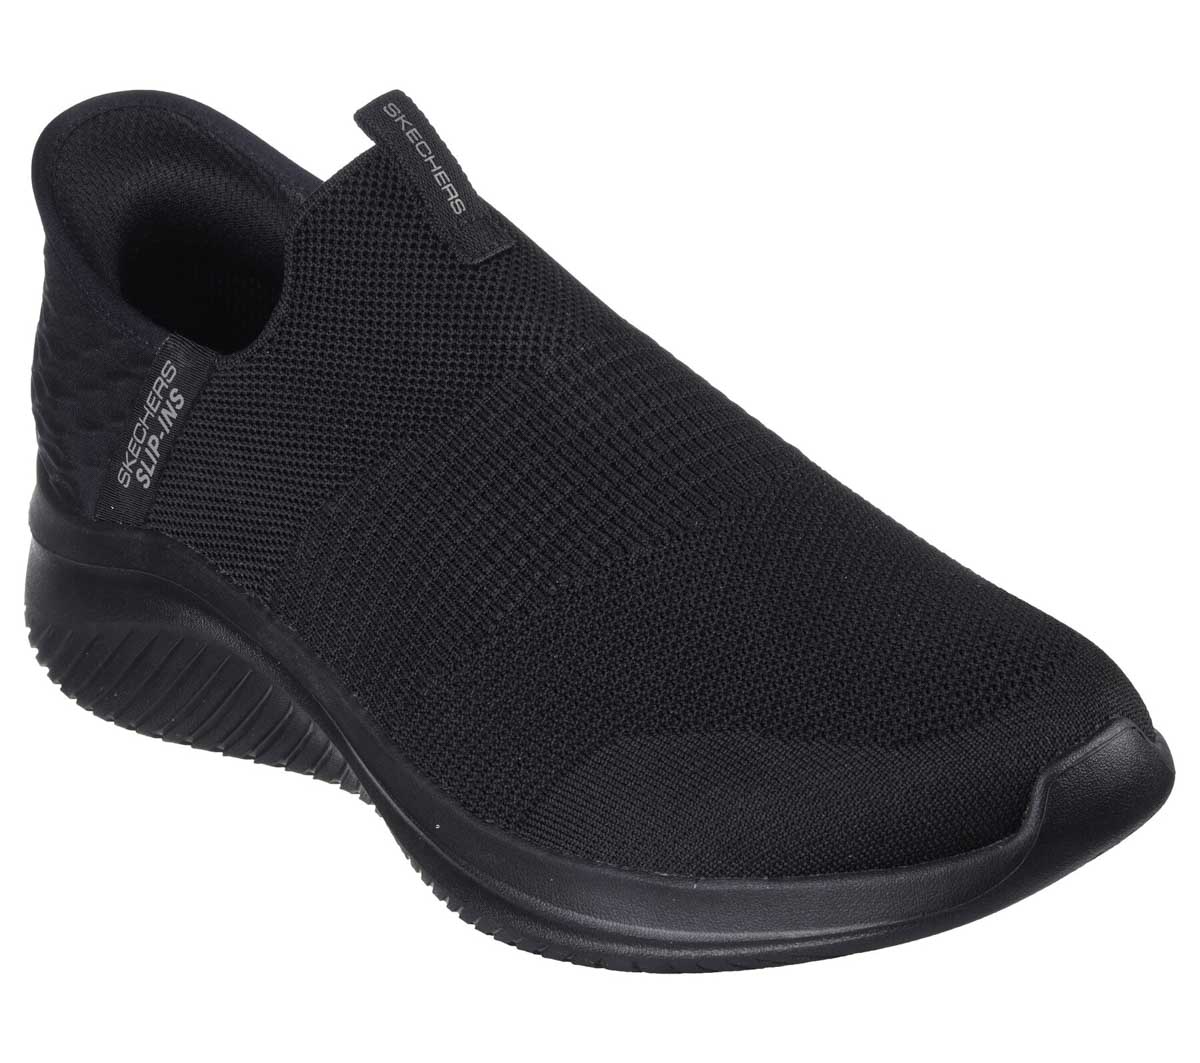     Front view of Skechers Ultra Flex 3.0 featuring the engineered knit upper.